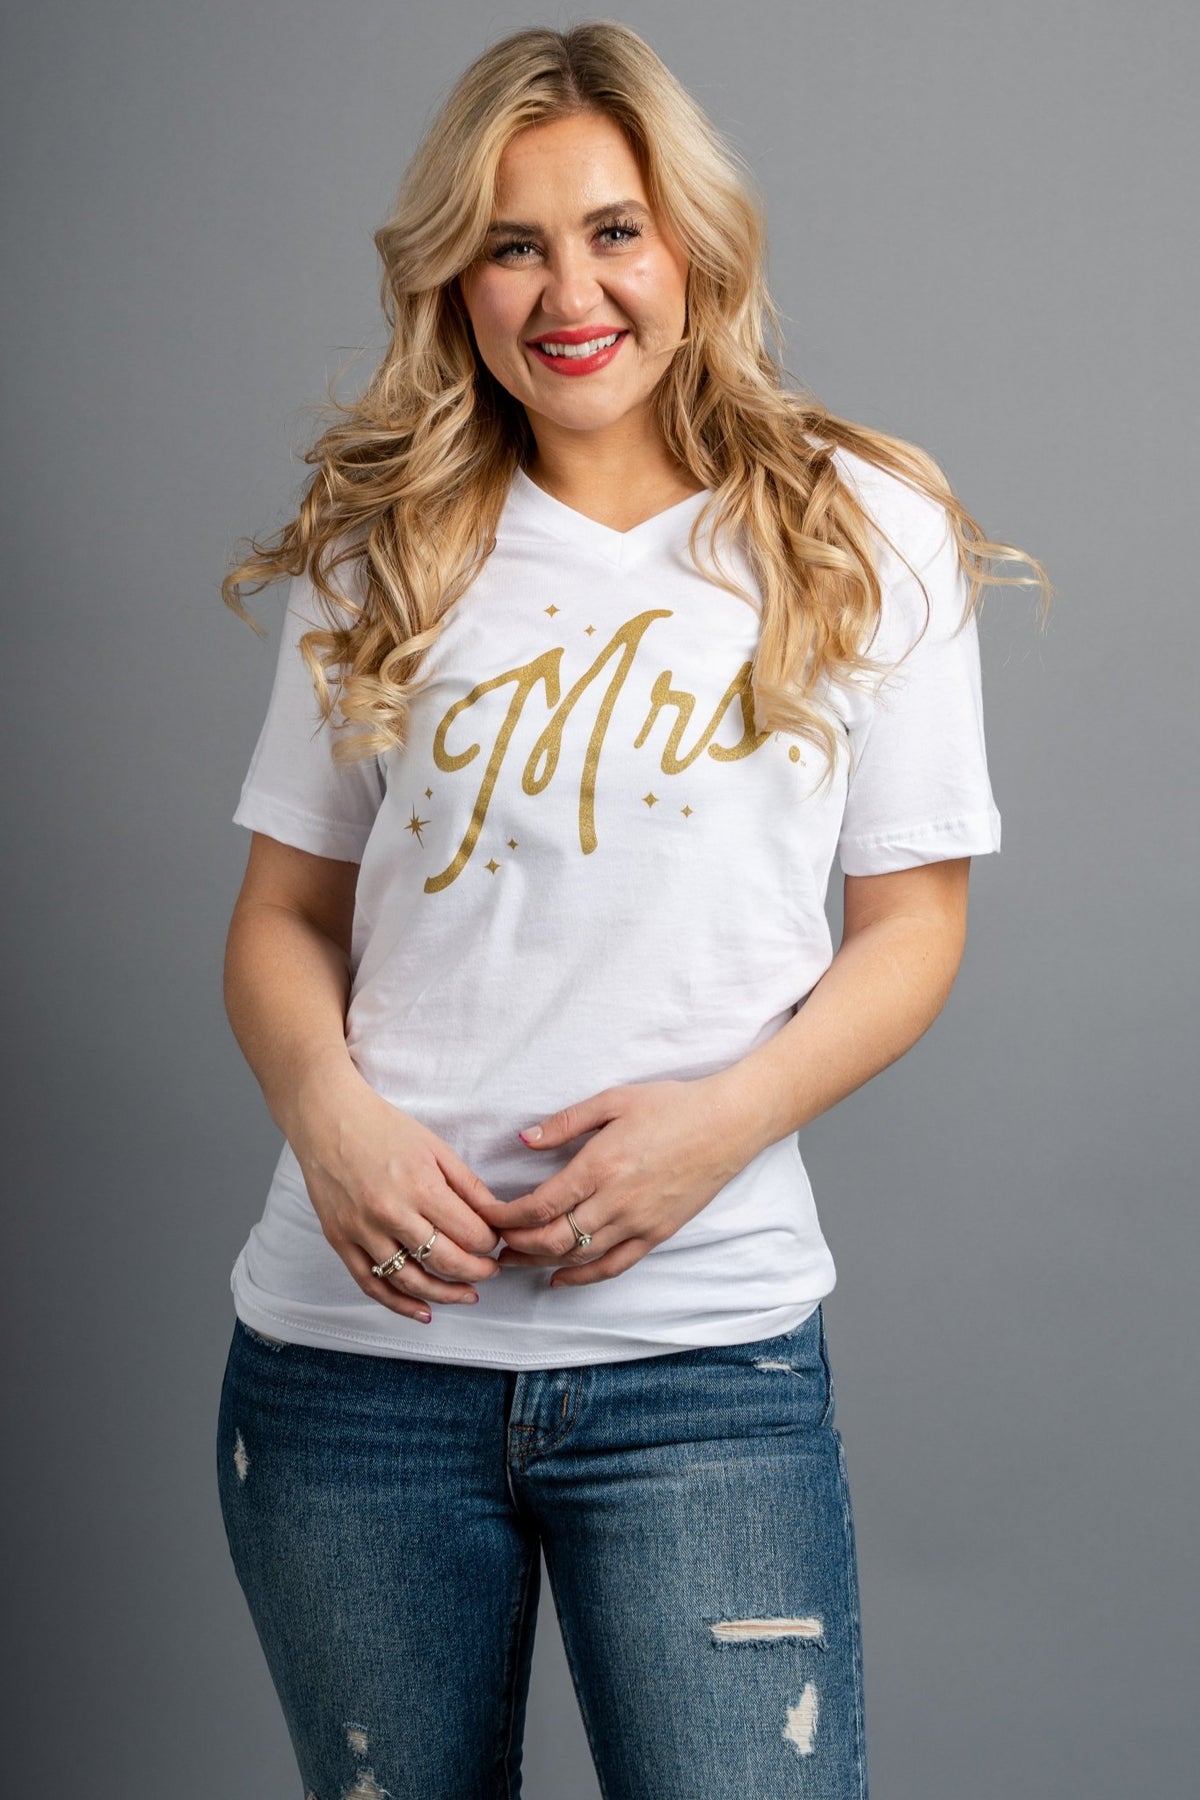 Mrs Script v-neck short sleeve t-shirt white - Stylish t-shirt - Trendy Graphic T-Shirts and Tank Tops at Lush Fashion Lounge Boutique in Oklahoma City